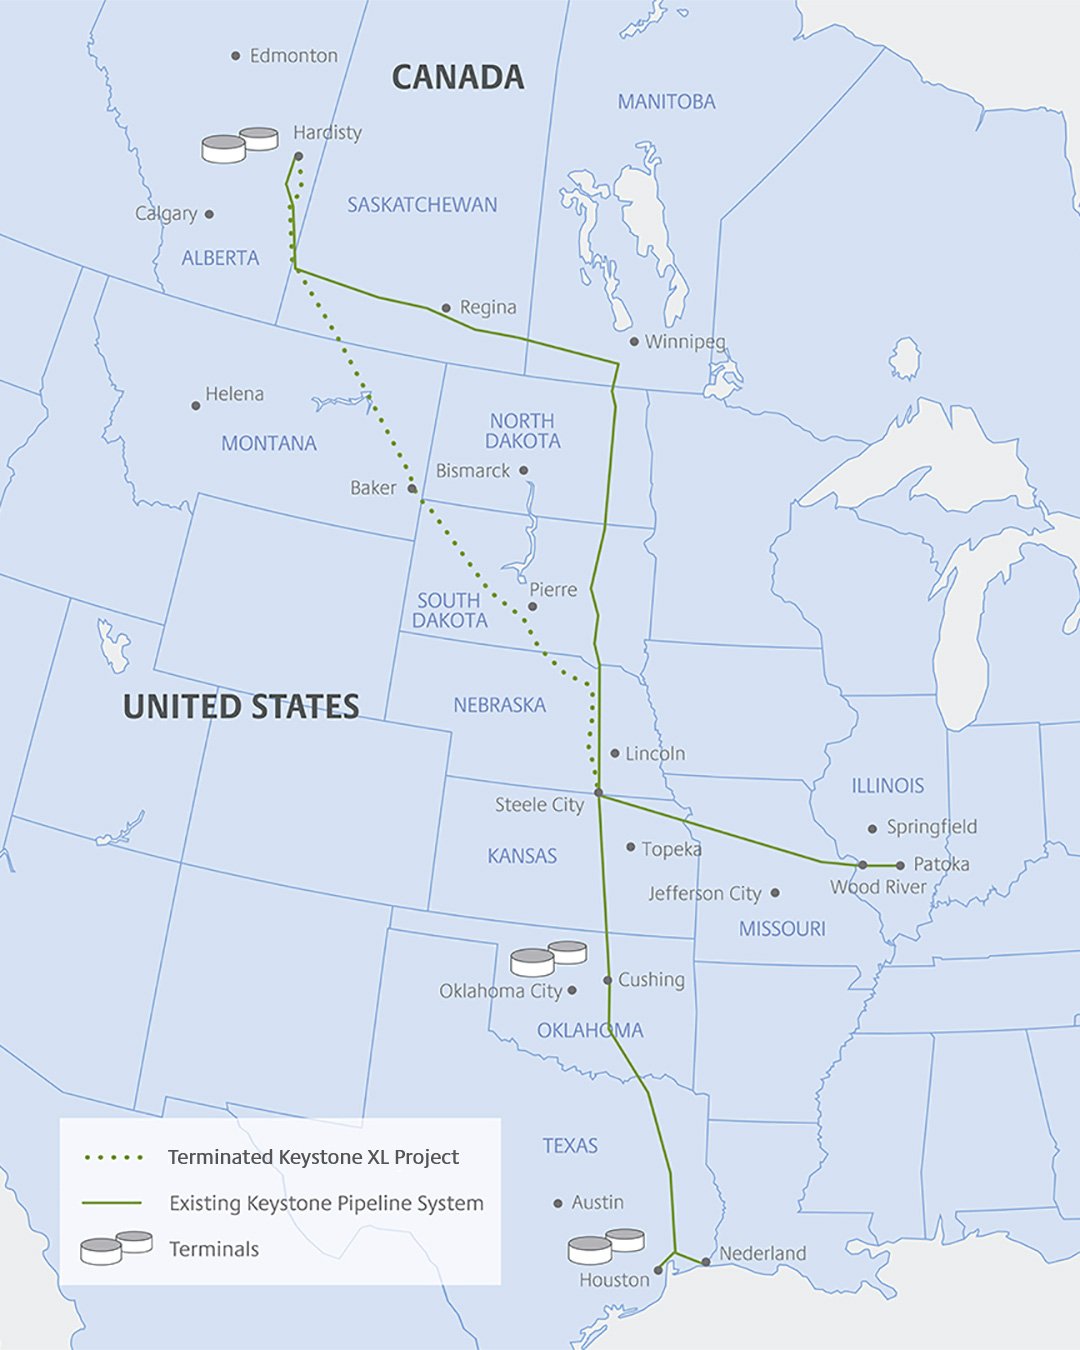 terminated-keystone-xl-pipeline-route-map-overall-1080x1350.jpg